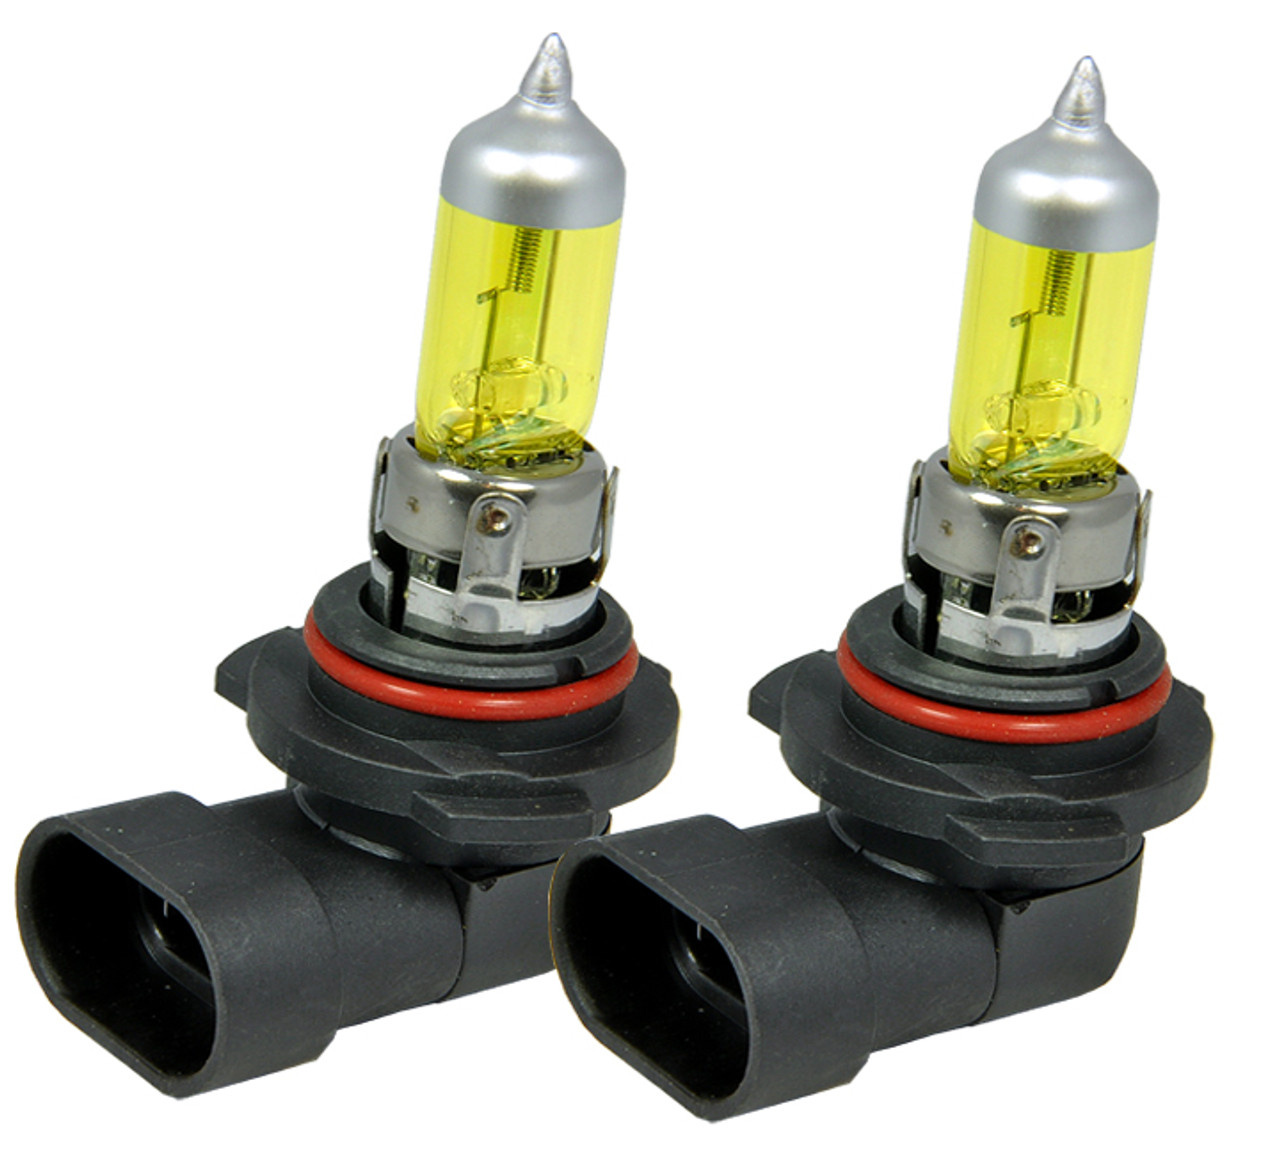 ICBEAMER 1 Pair H4 9003/HB2 12V 100W Direct Replace For Auto Vehicle  Factory Halogen Light Bulbs [Color: Super White]